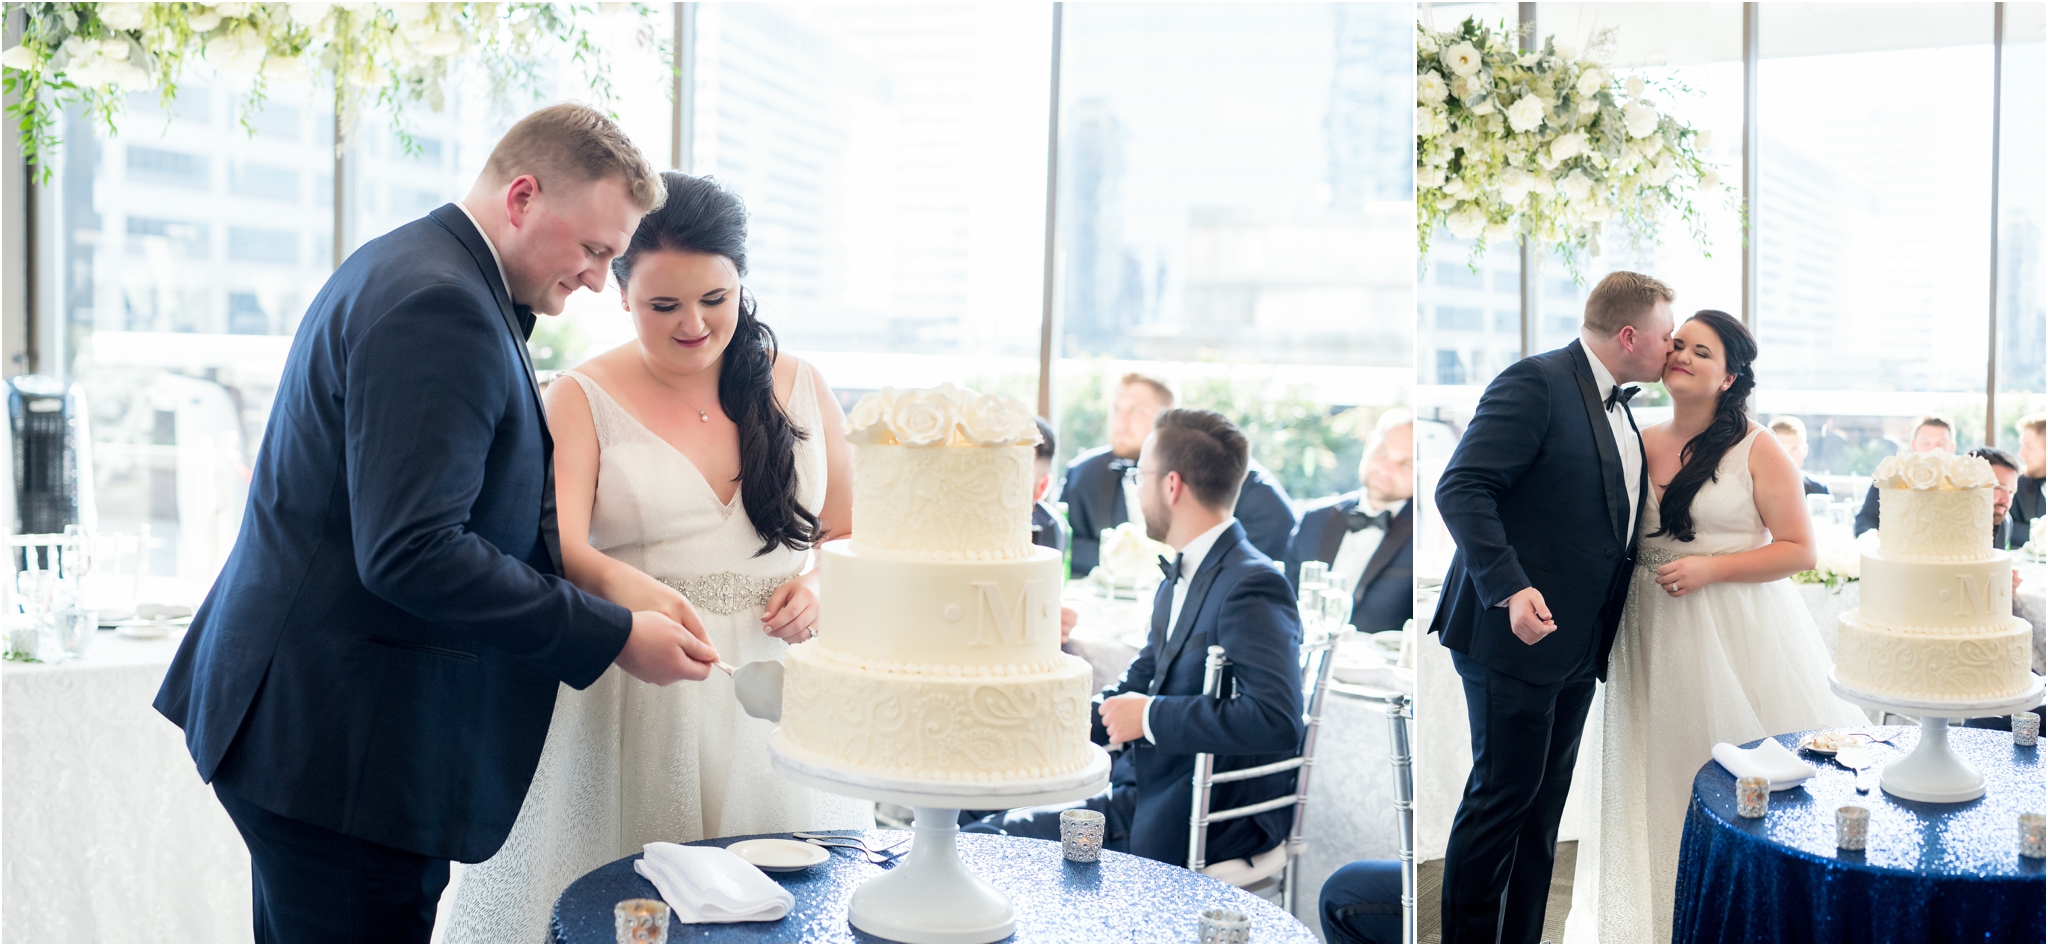 Regions Tower | Sarah and Rachel Wedding Photographers | Indianapolis, IN | Cake Cutting